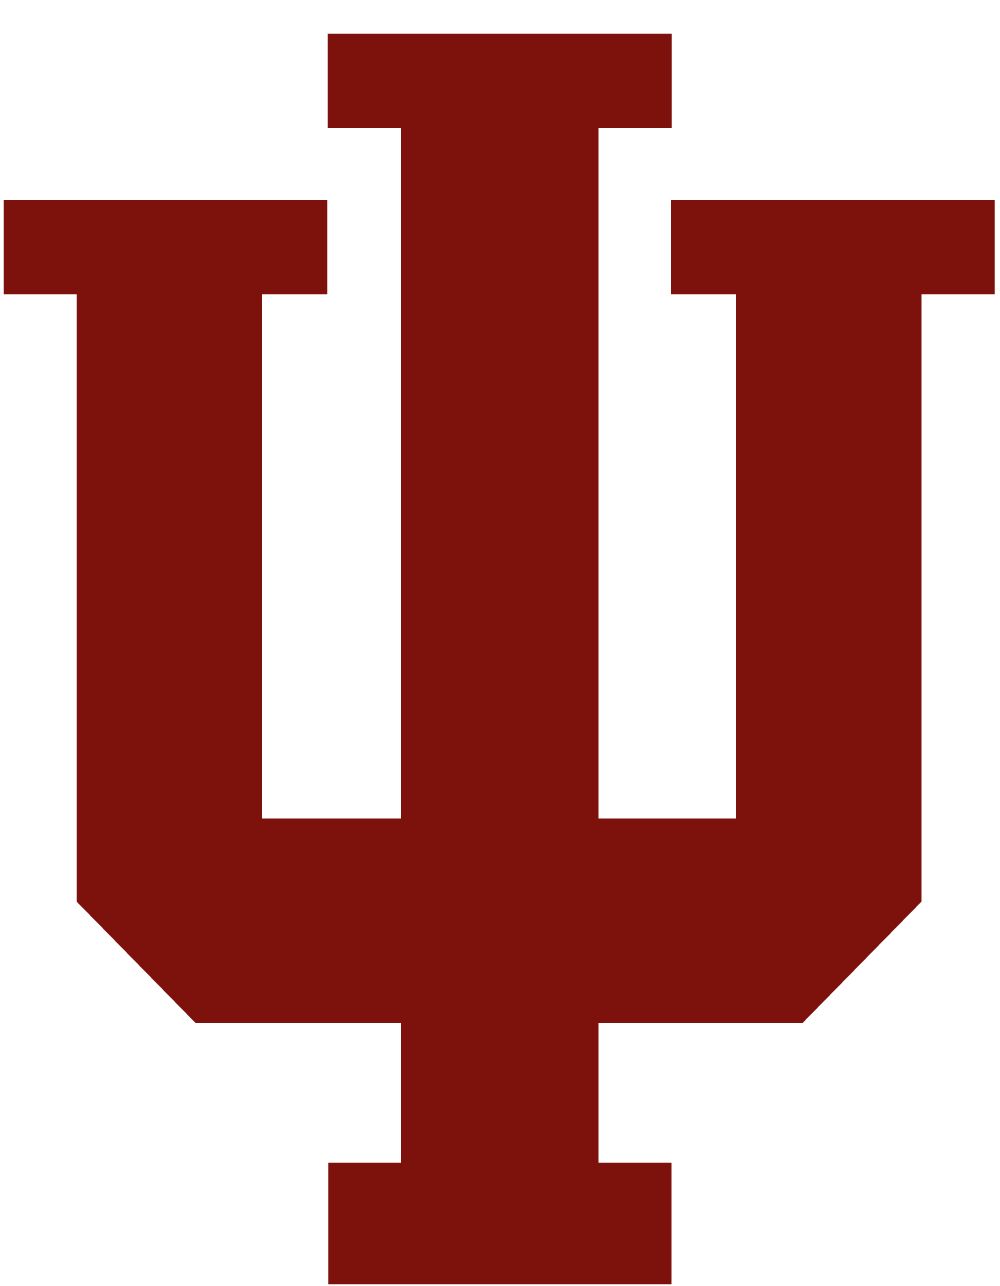 IU College Logo - New Frontiers grants in the Arts and Humanities awarded to IU ...